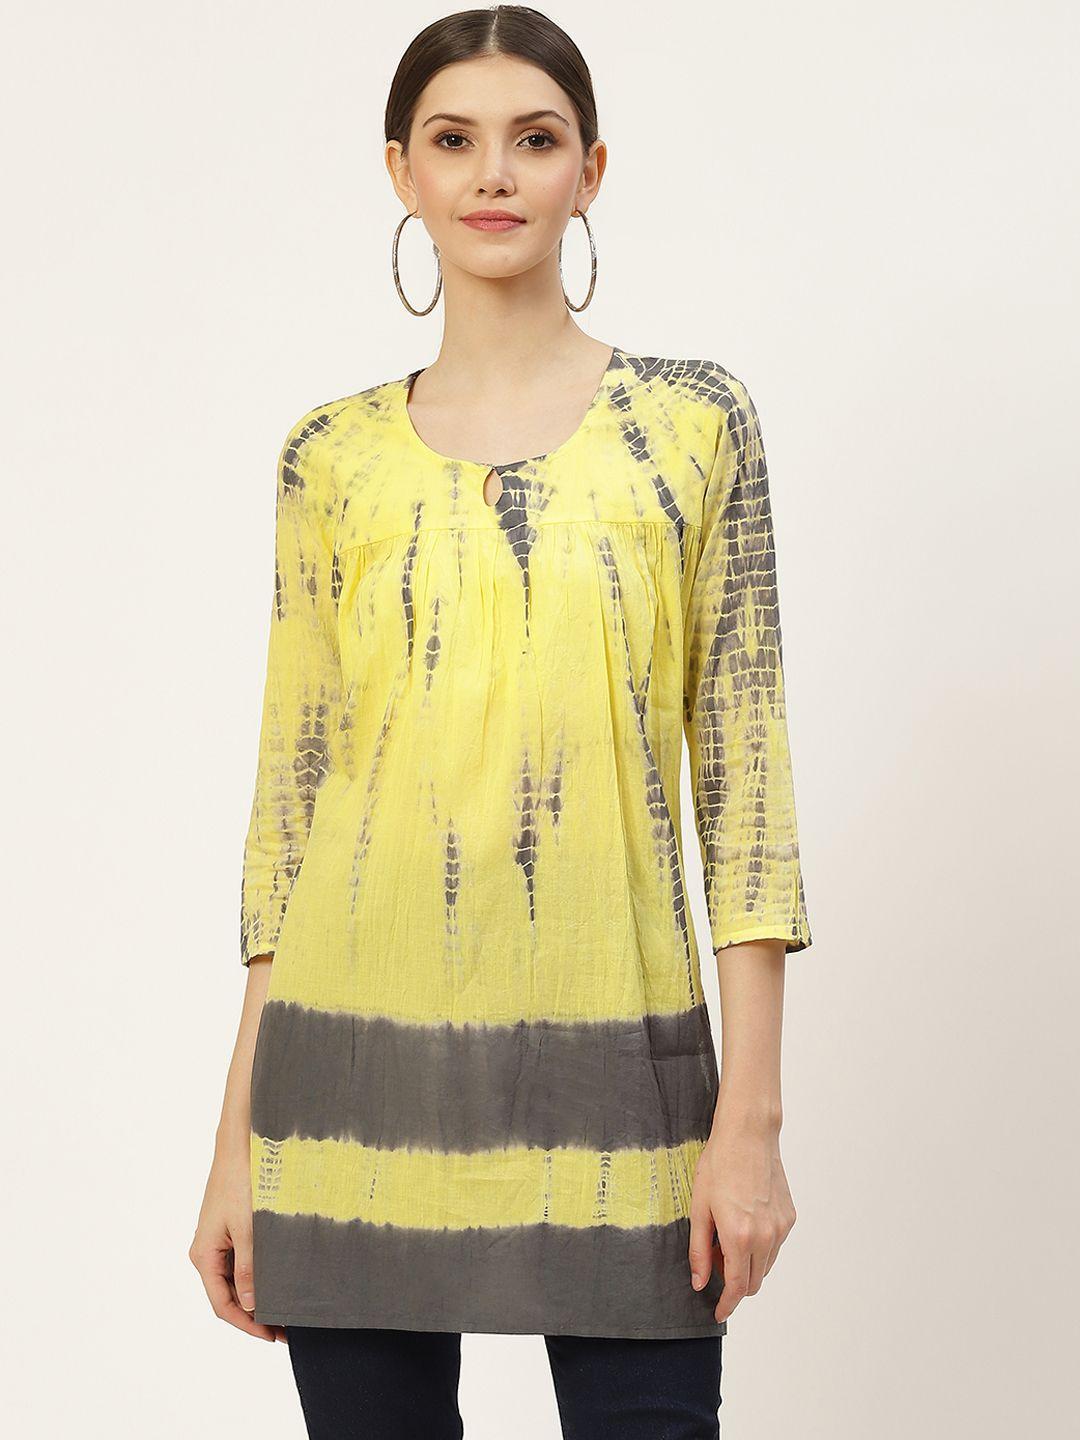 kbz yellow tie and dye pure cotton top